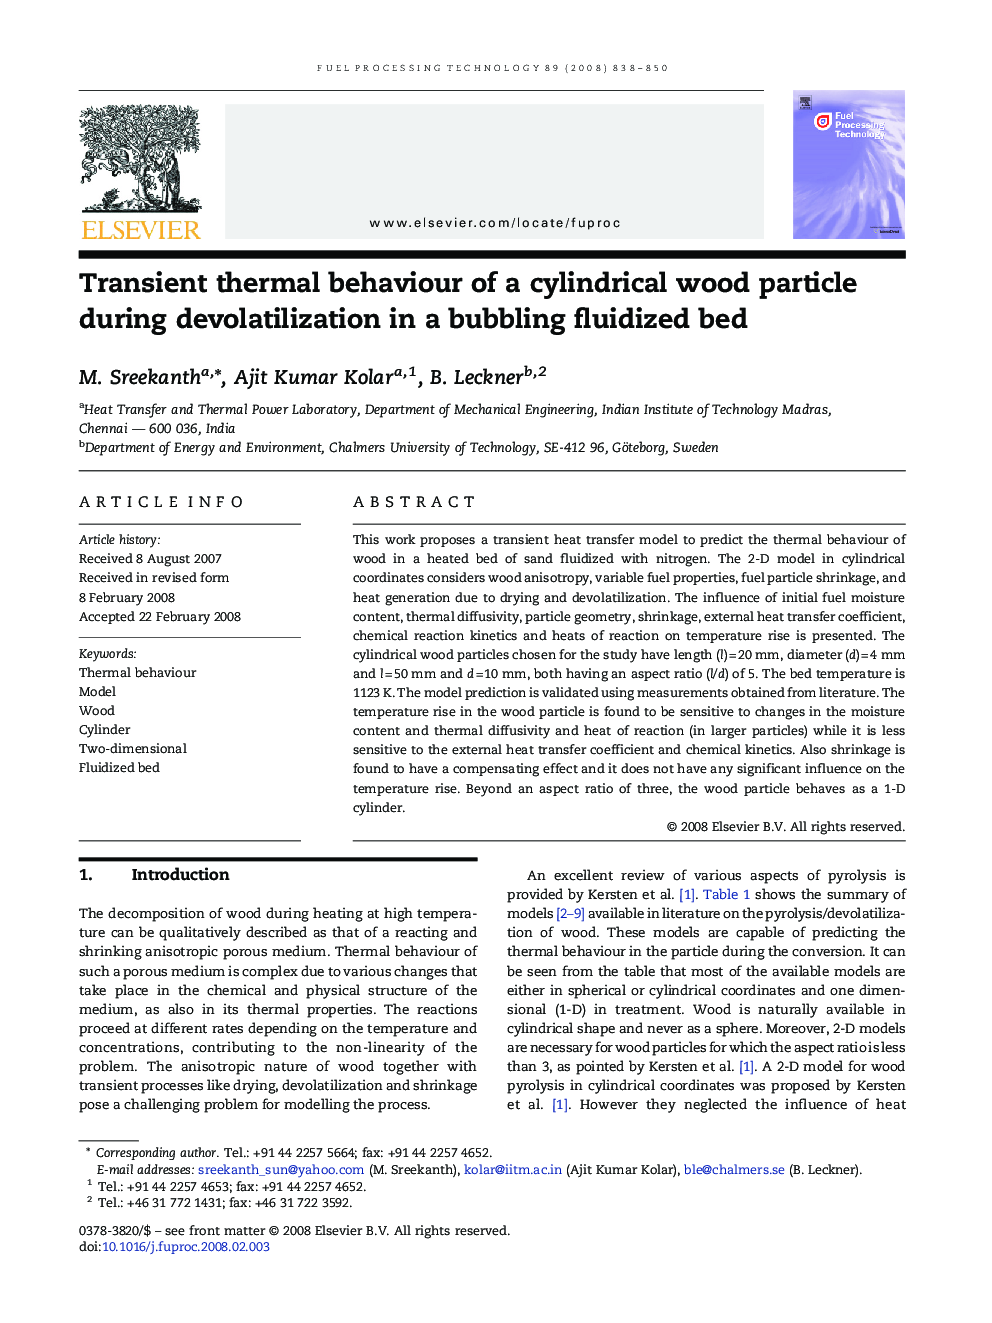 Transient thermal behaviour of a cylindrical wood particle during devolatilization in a bubbling fluidized bed